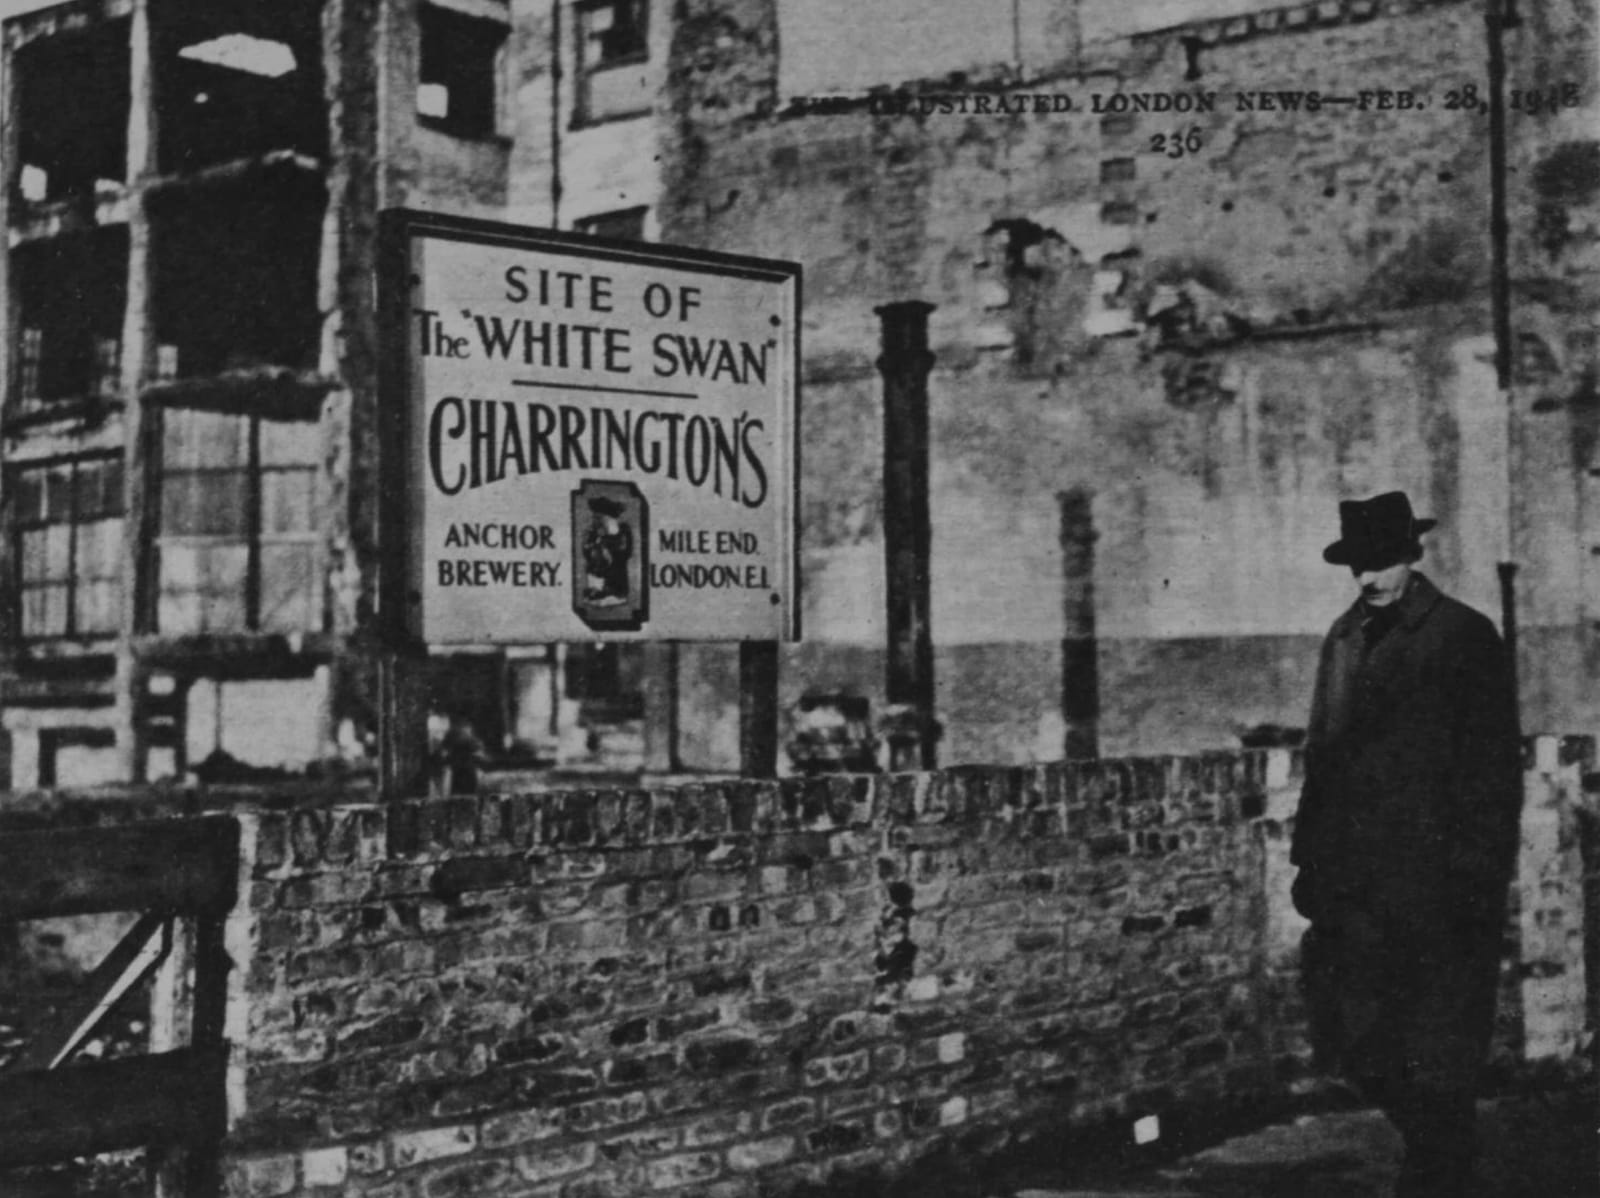 A man in black hat and coat walking in front of a wall with a sign protruding above it on two posts. There are destroyes buildings behind the sign, which reads "Site of the 'White Swan'. Charrington's. Anchor Brewery, Mile End, London E1."